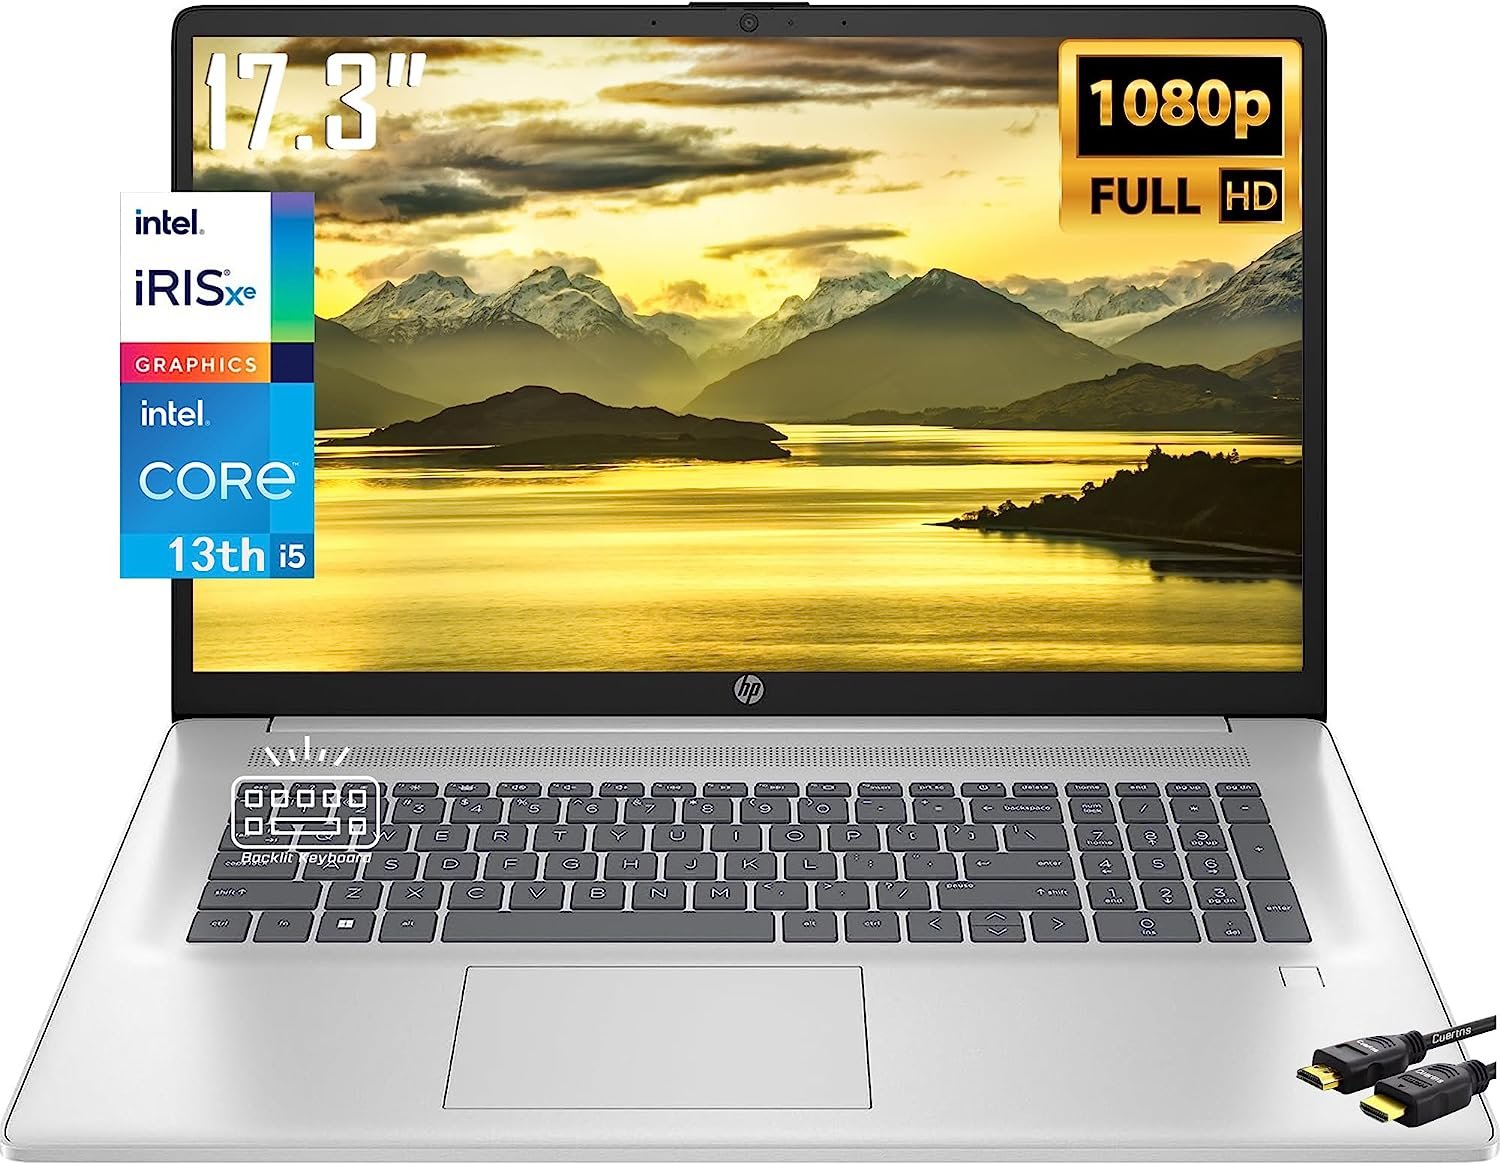 HP Newest 17.3" IPS FHD Laptop